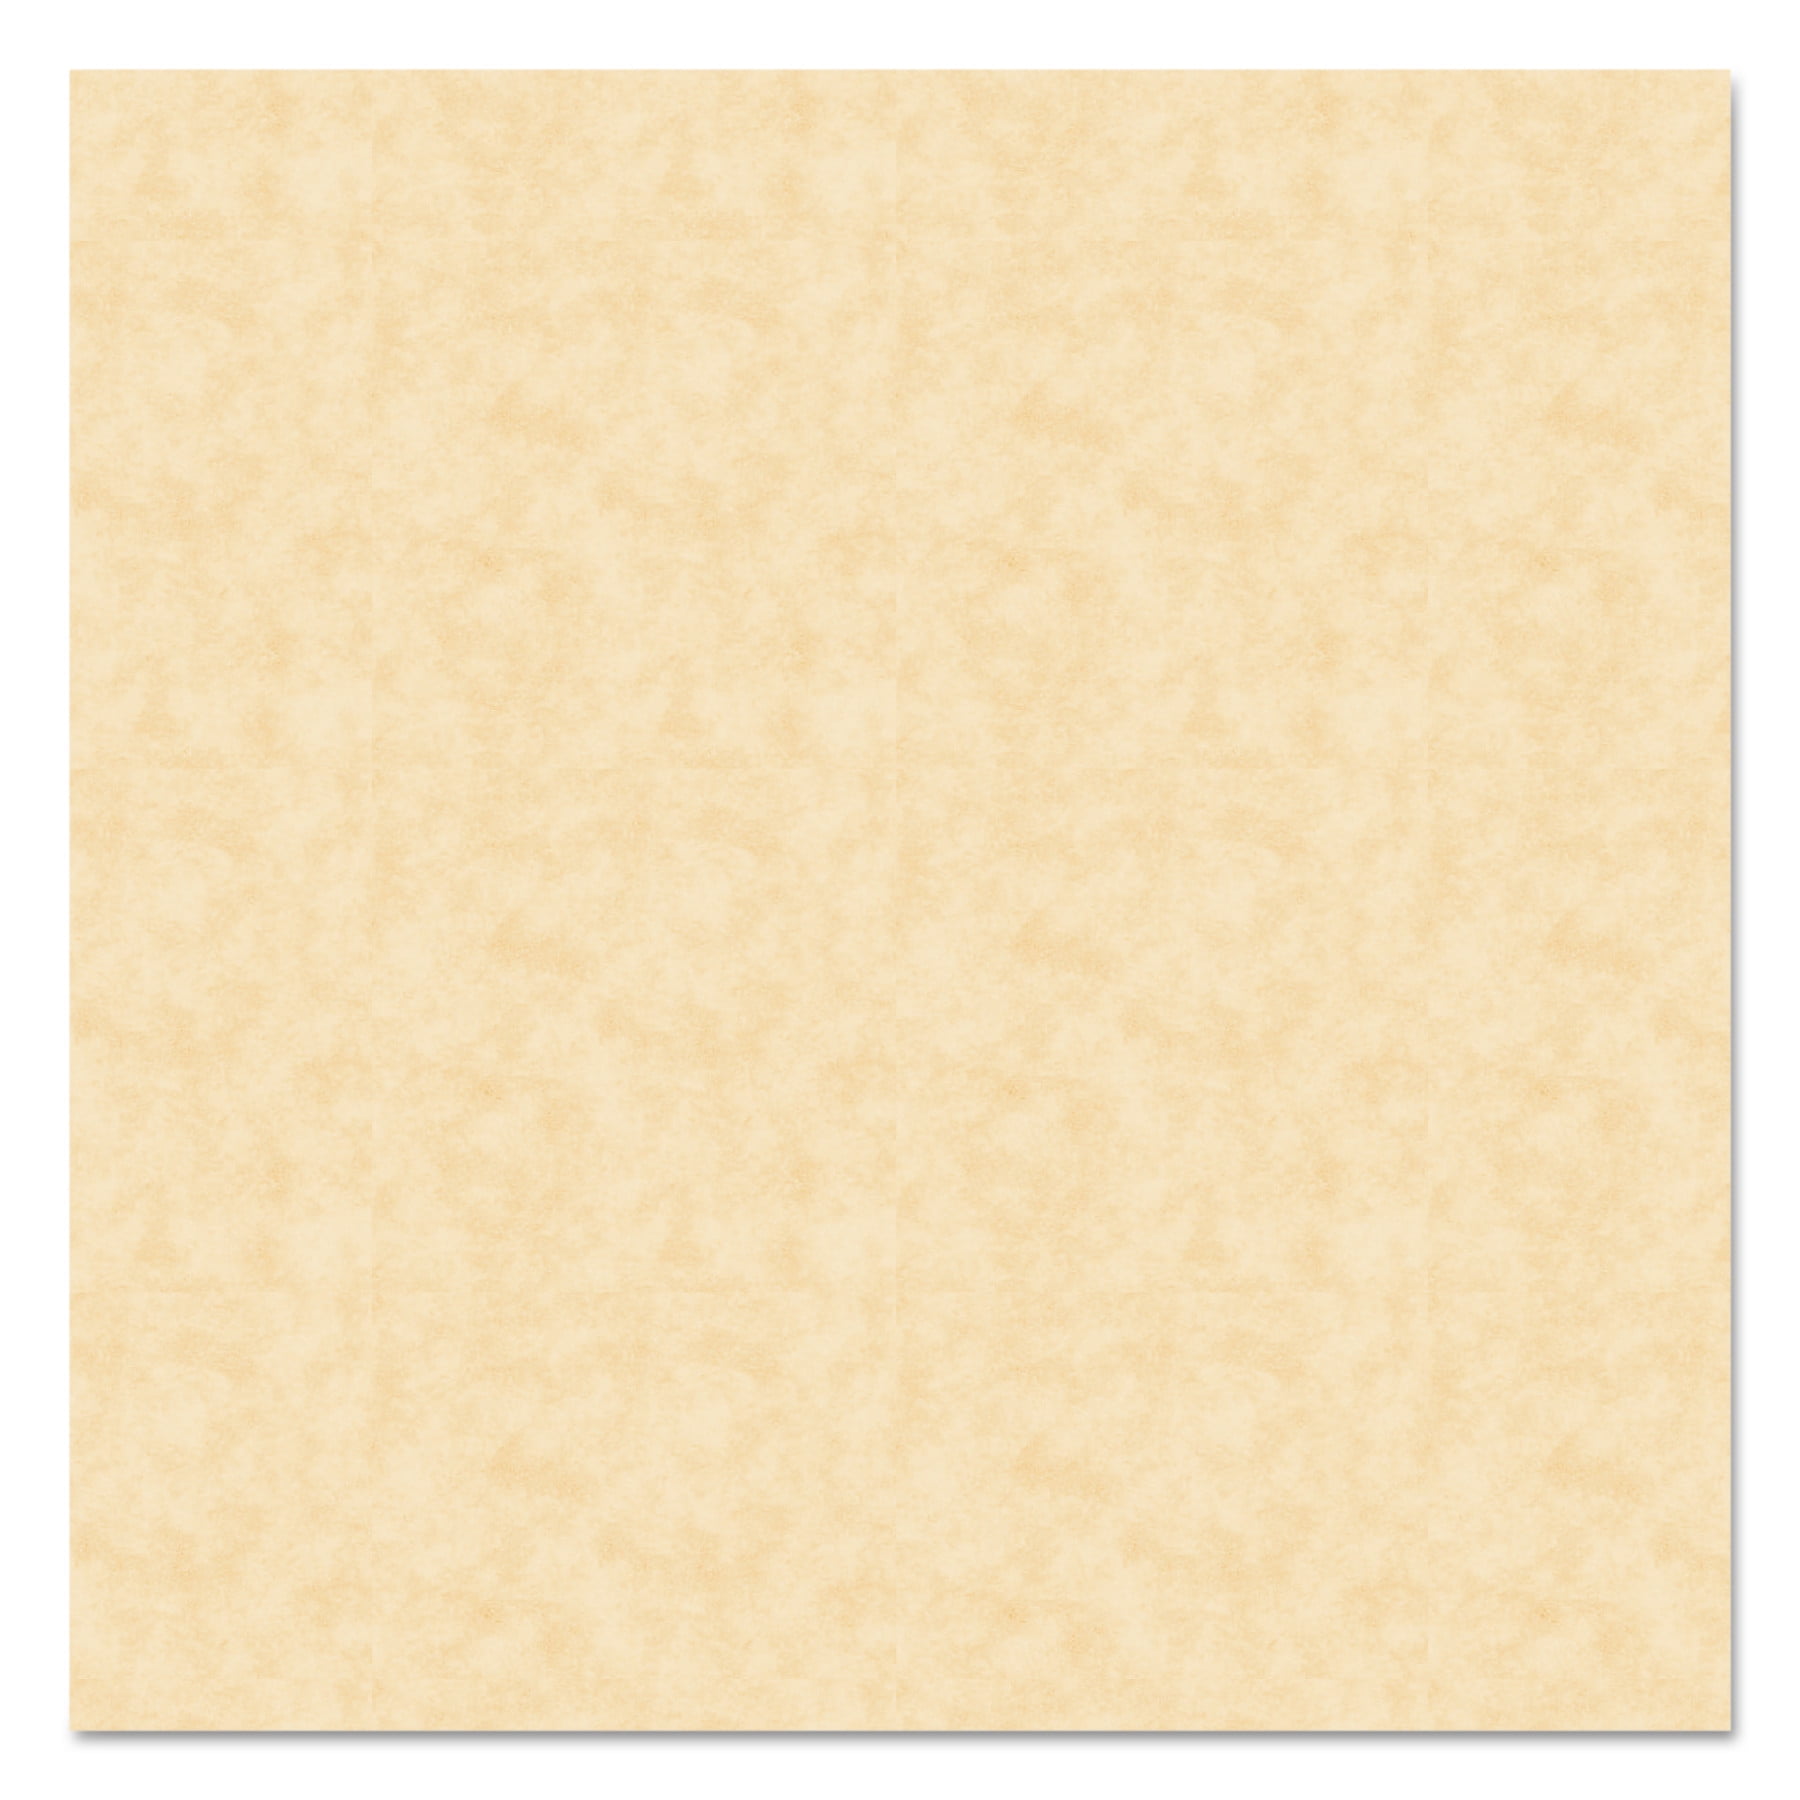 Southworth Ivory Copy Paper, Light Off-White - 100 count